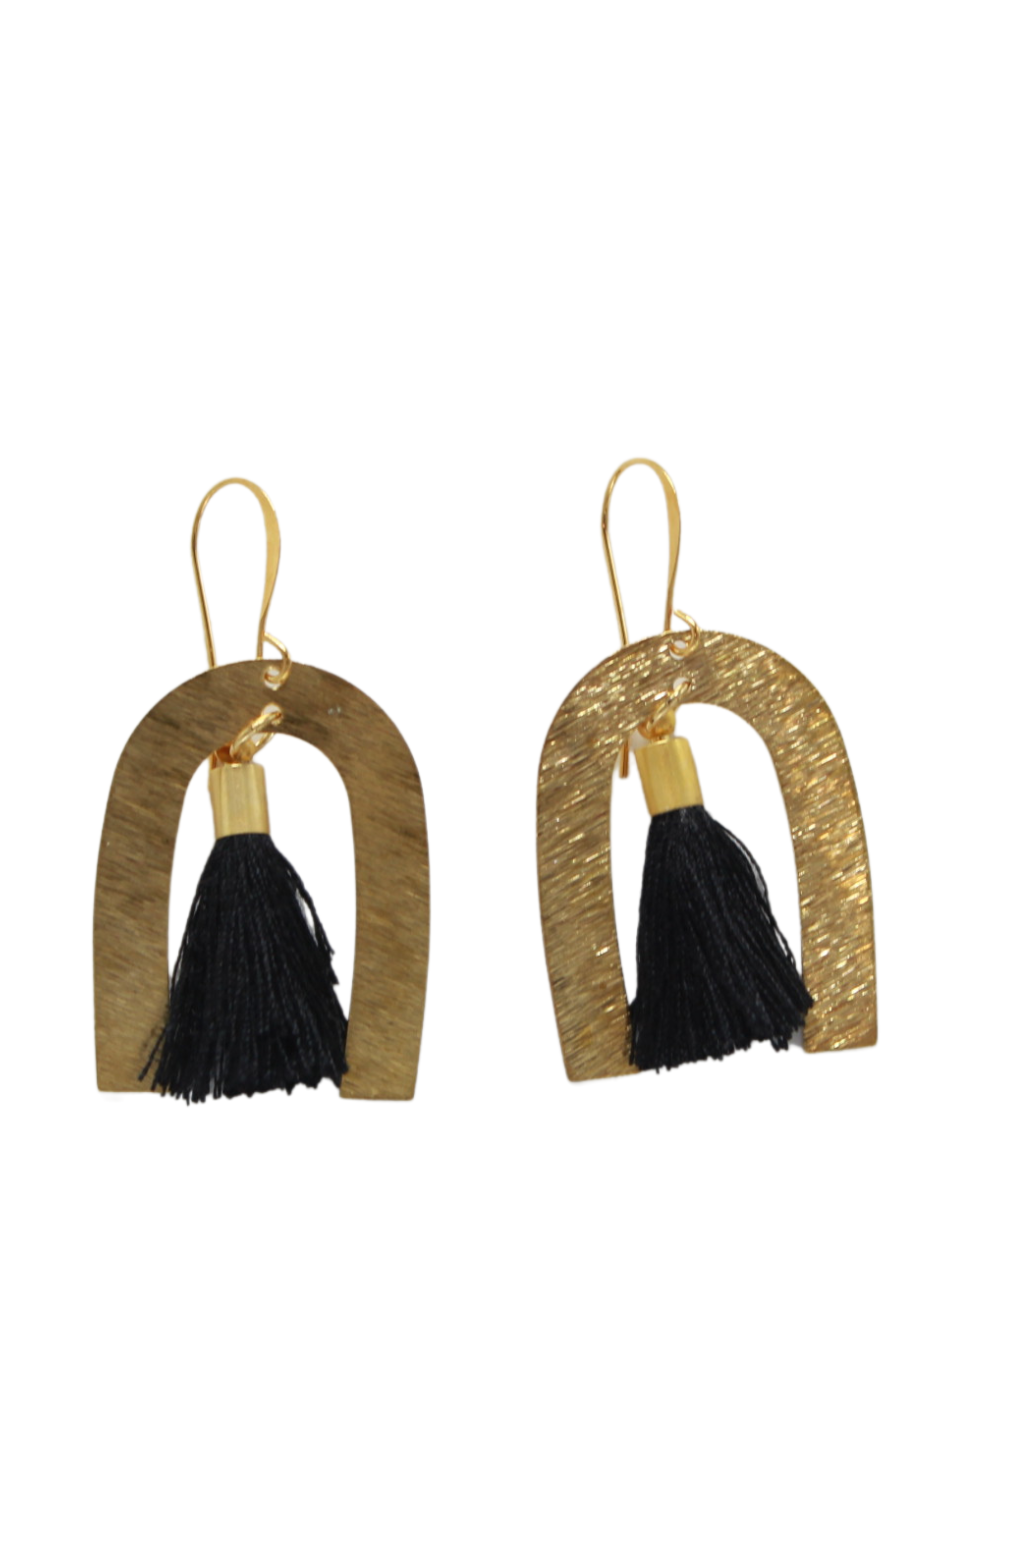 Cheer on PomPom Earrings by Annie Claire Designs - SoSis